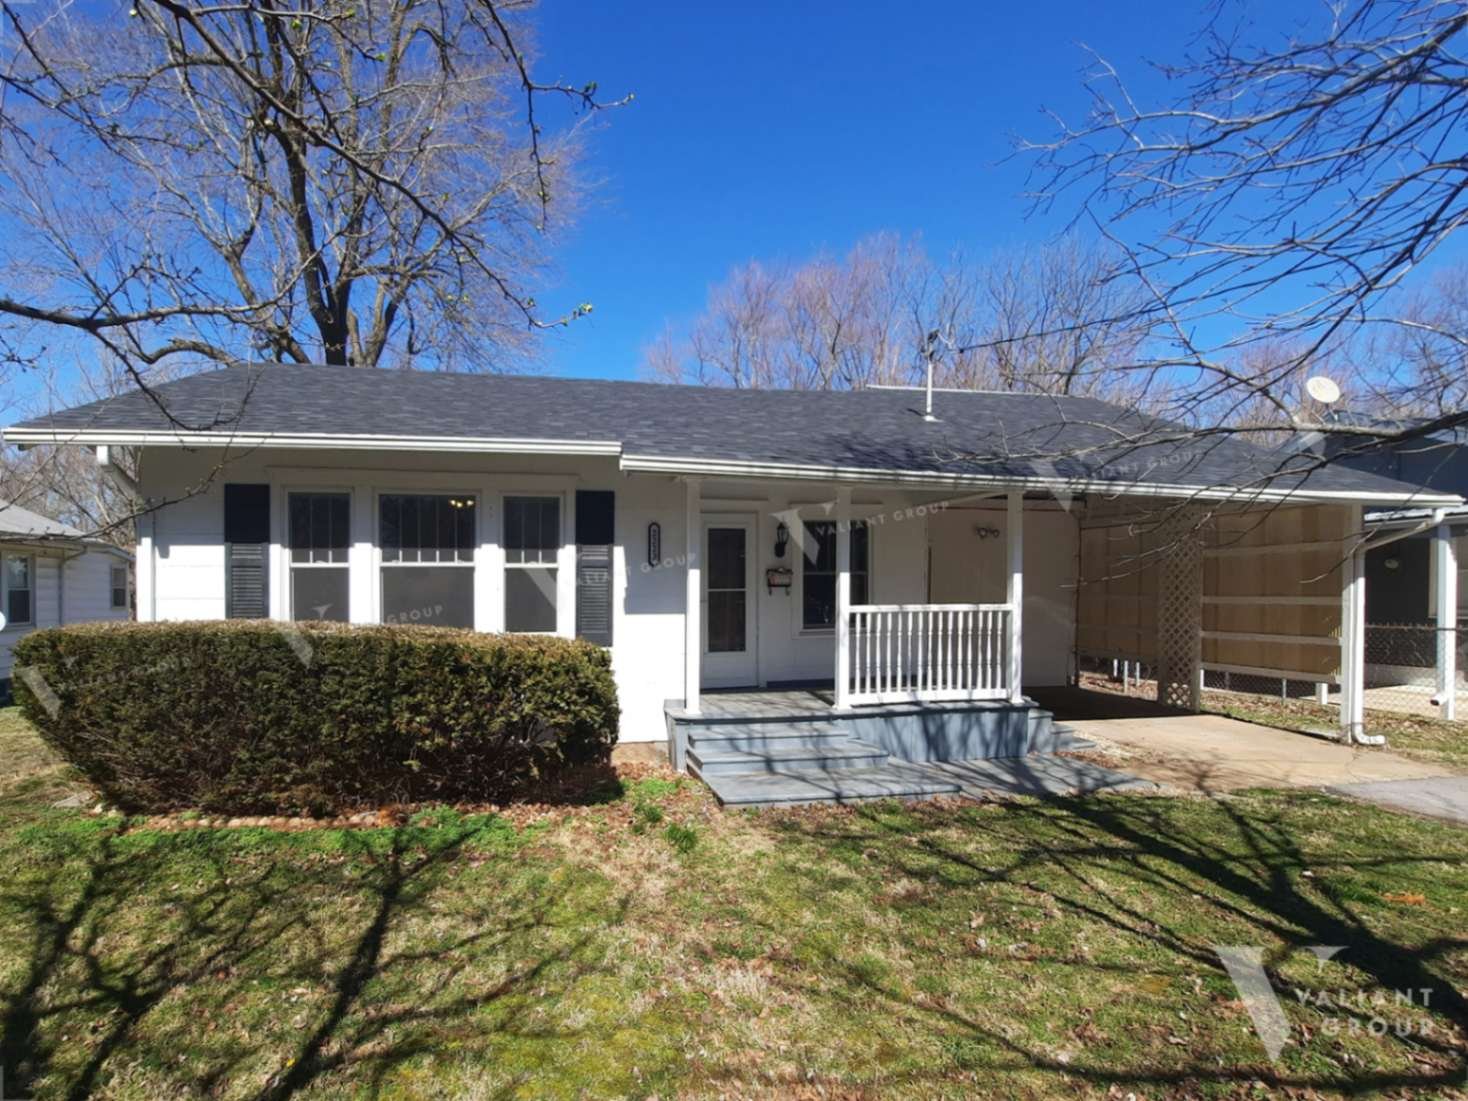 House-for-Rent-2223-W-Elm-St-Springfield-MO-02-Exterior-Front-Porch02.jpg